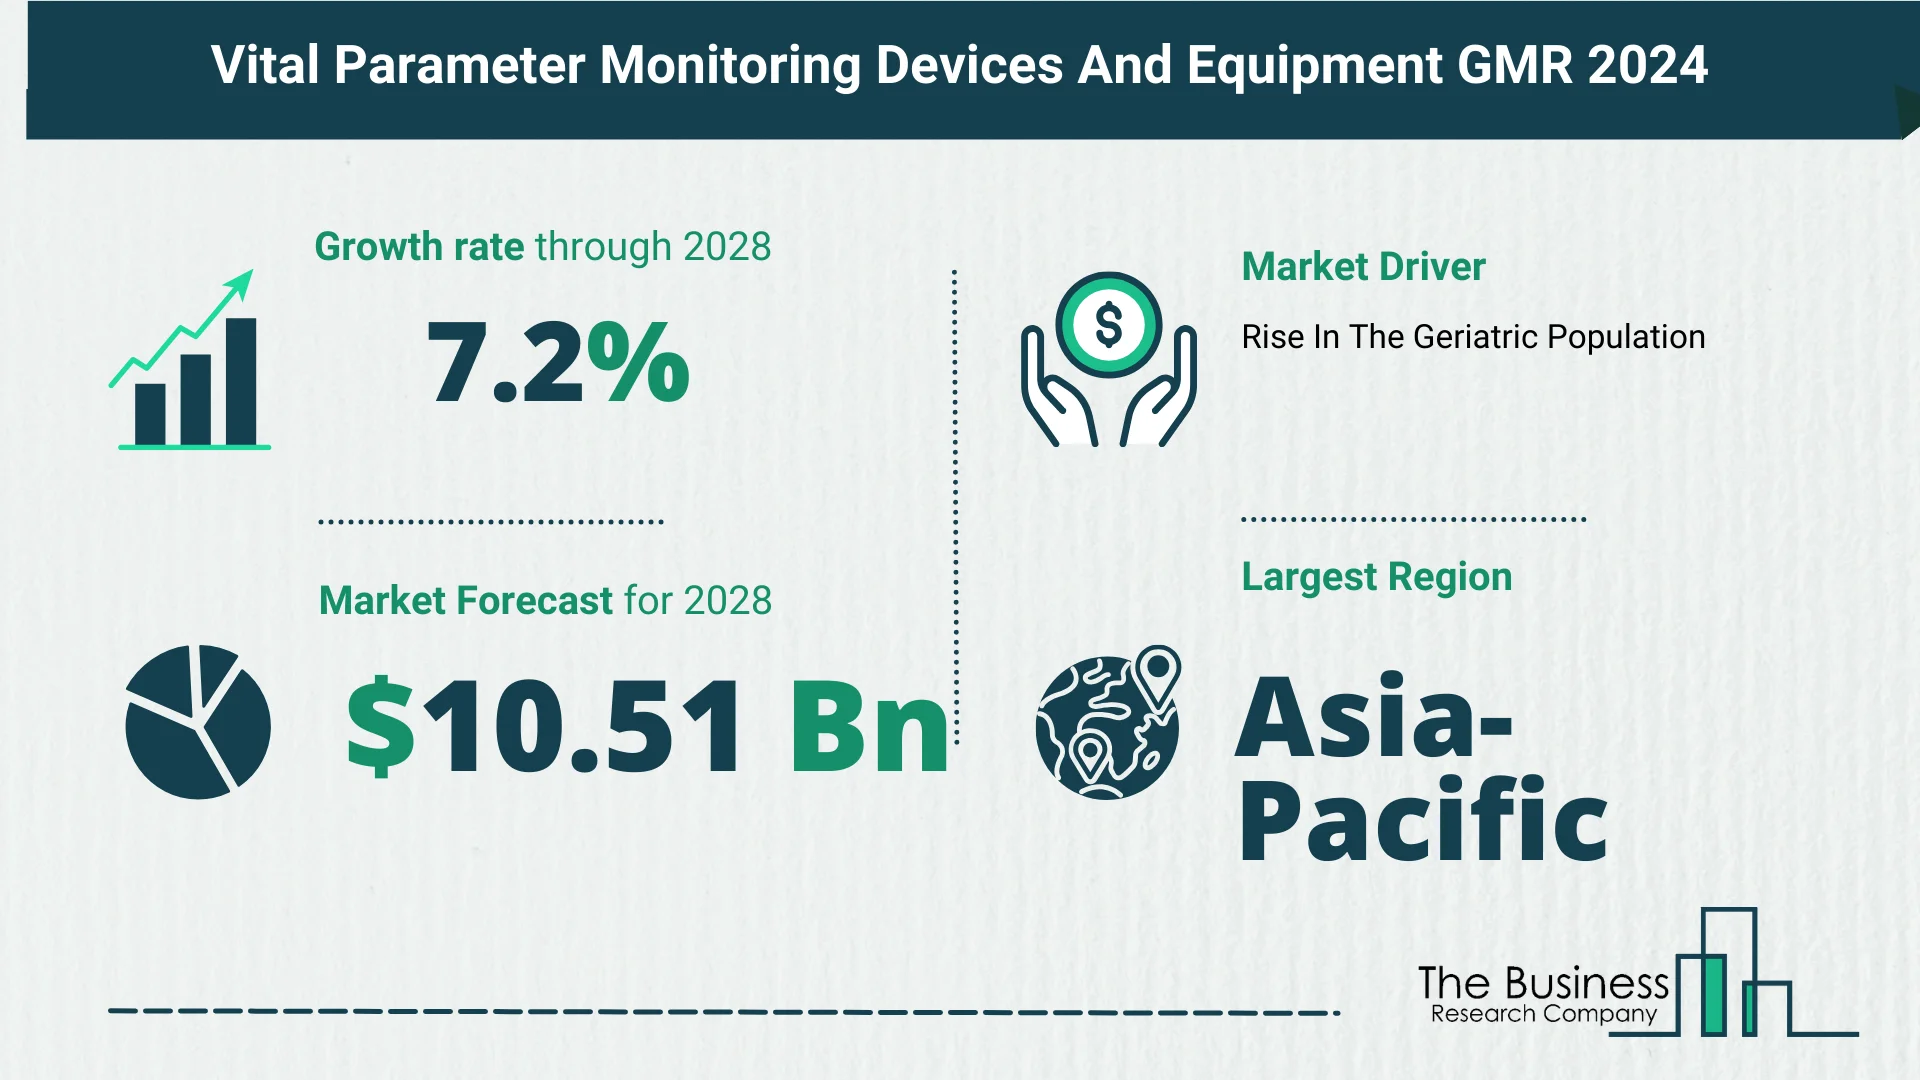 Overview Of The Vital Parameter Monitoring Devices And Equipment Market 2024: Size, Drivers, And Trends